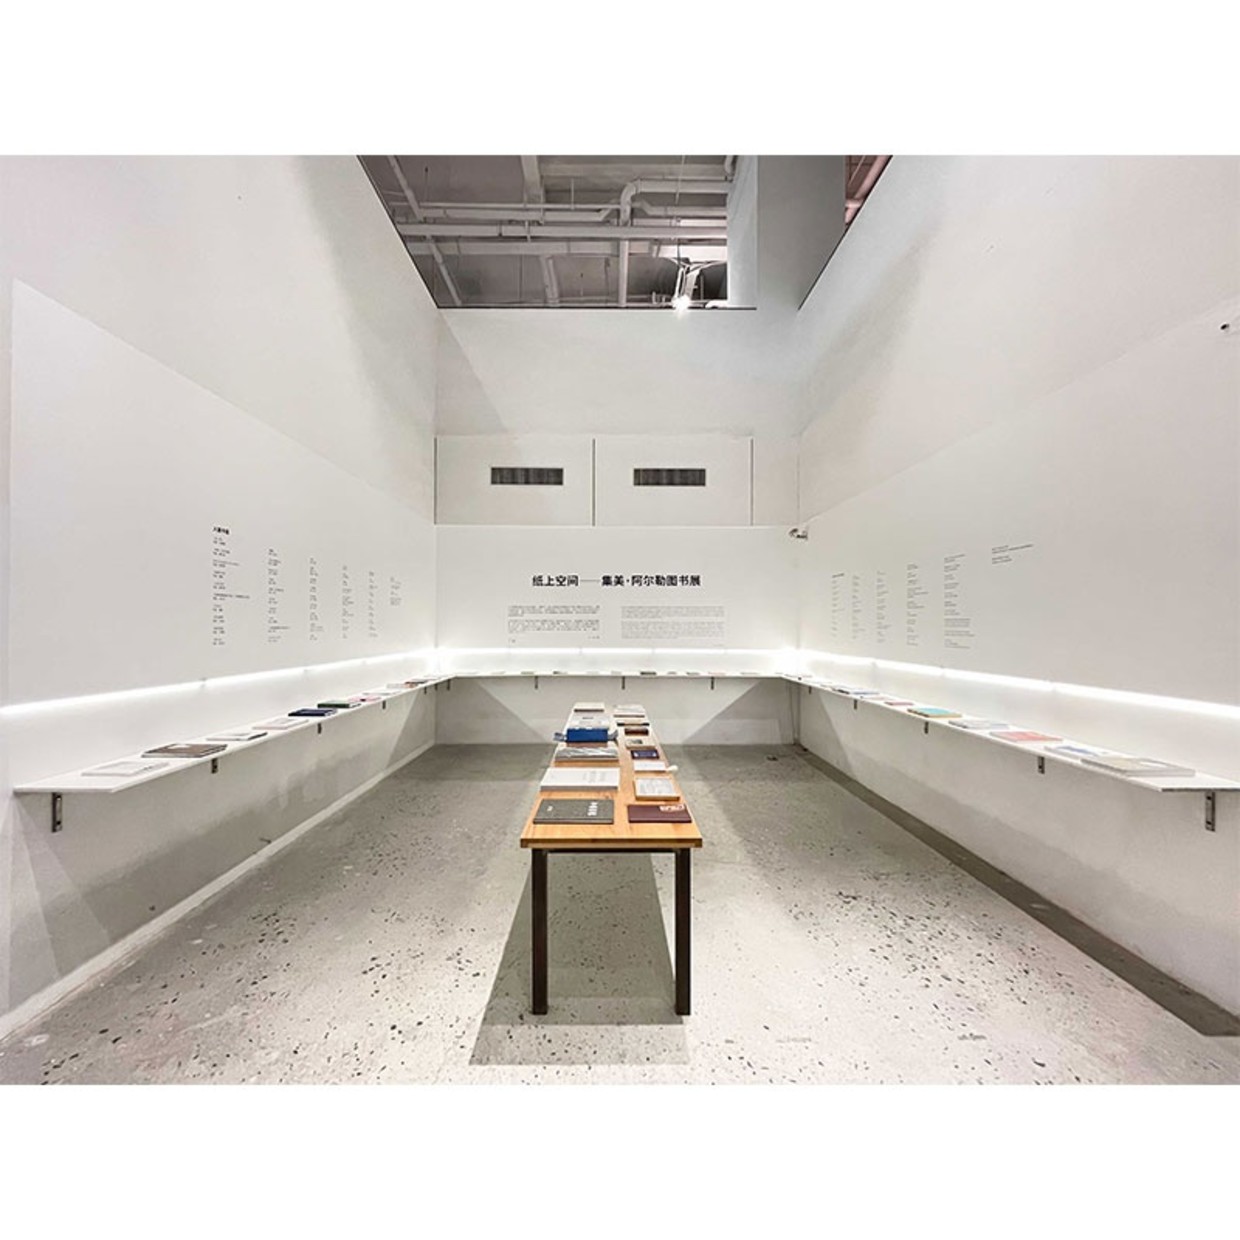 Space on Paper - Jimei x Arles Chinese Contemporary Photo Book Exhibition As an important medium for presentation and creation,...